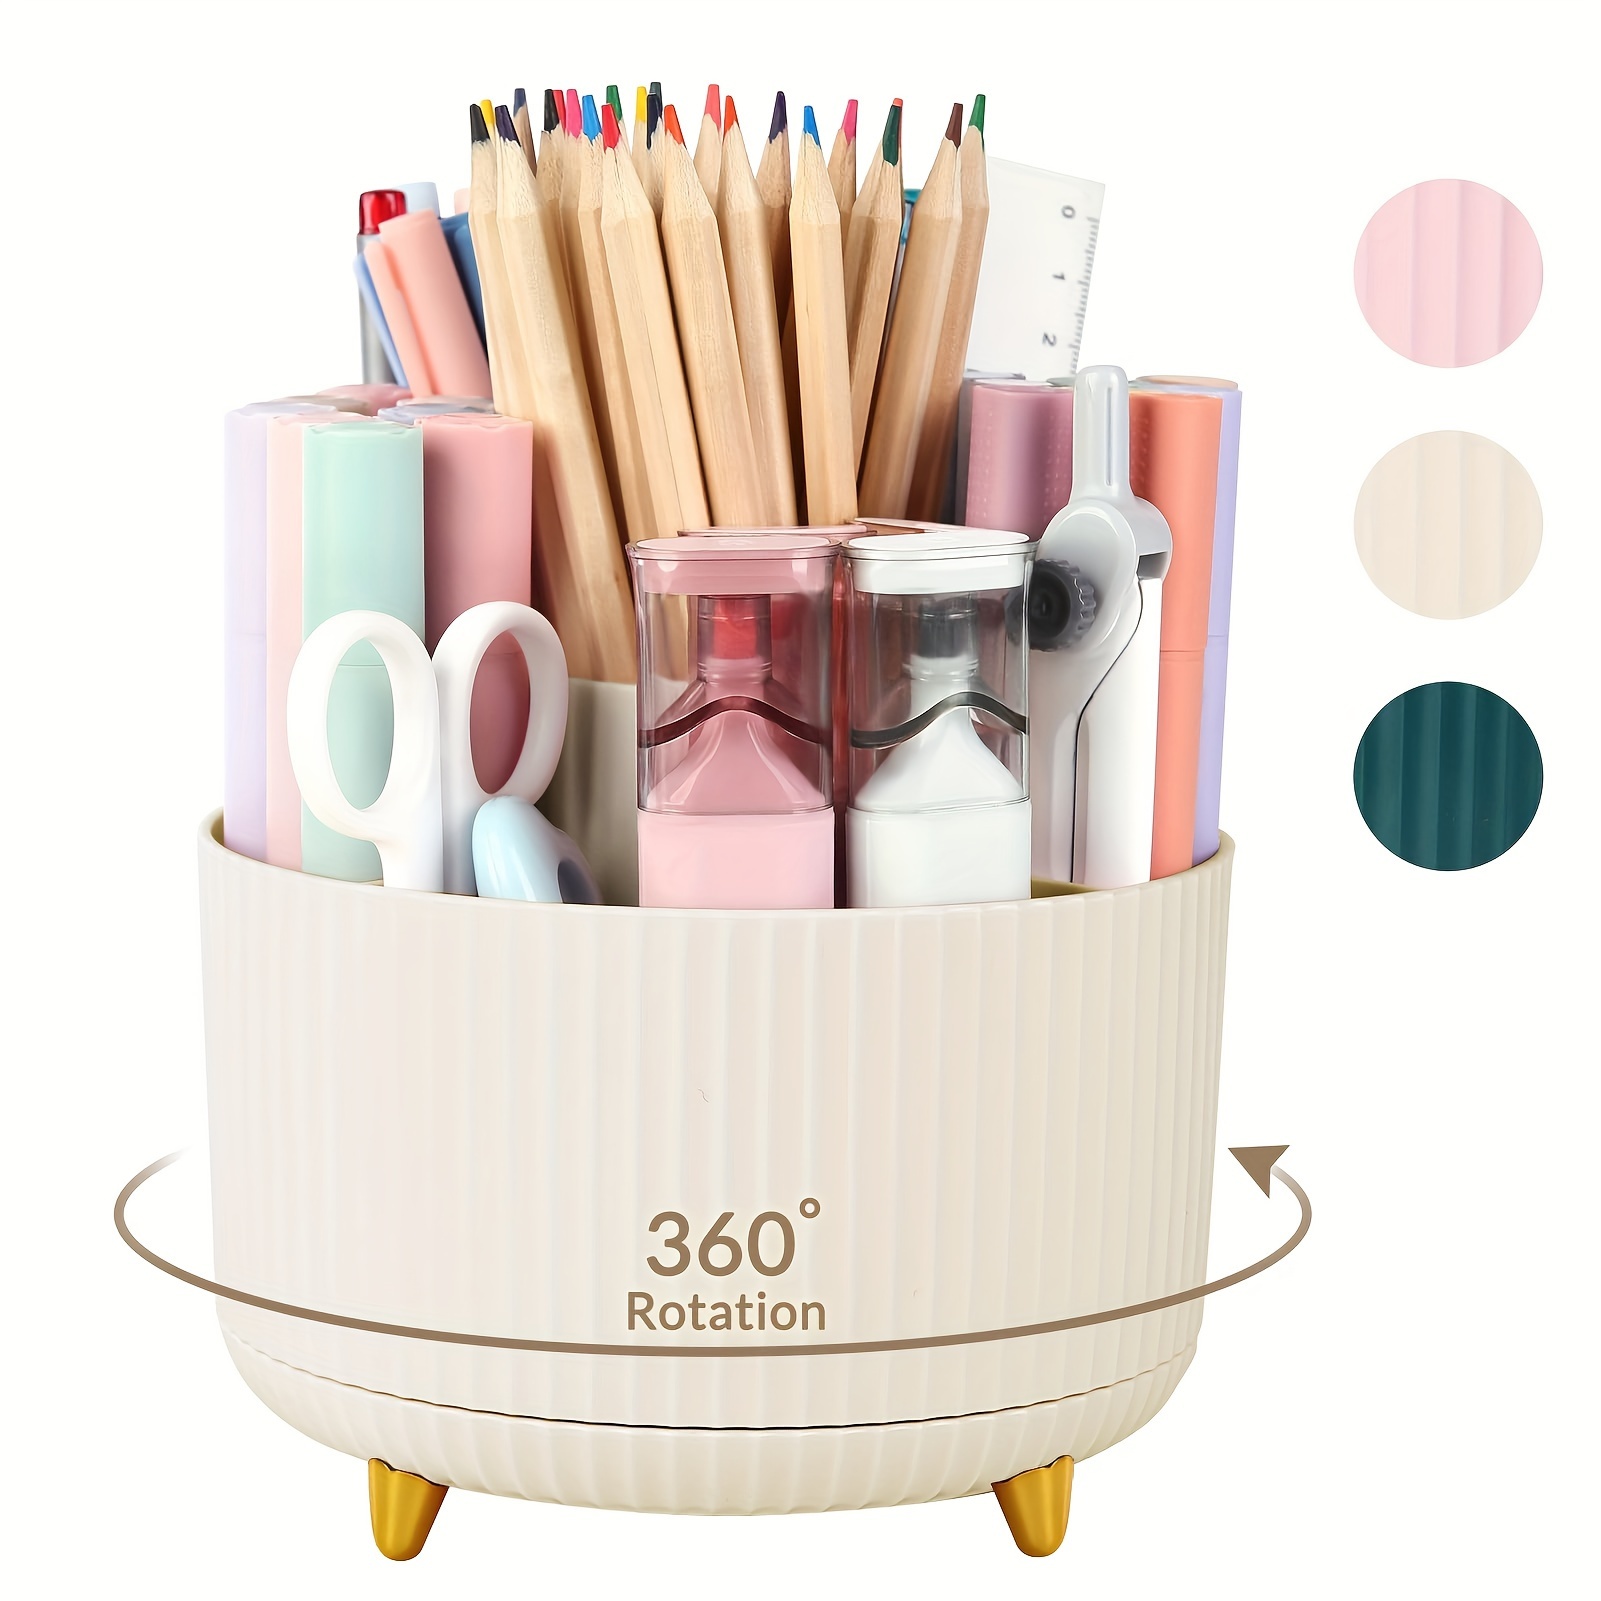 

360 Degree Rotating Desk Organizer, Dual-purpose Pencil Pen Holder For Desk, Rotating Desk Pen Organizer With 5 Slots, Pencil Cup For Office, School, Home